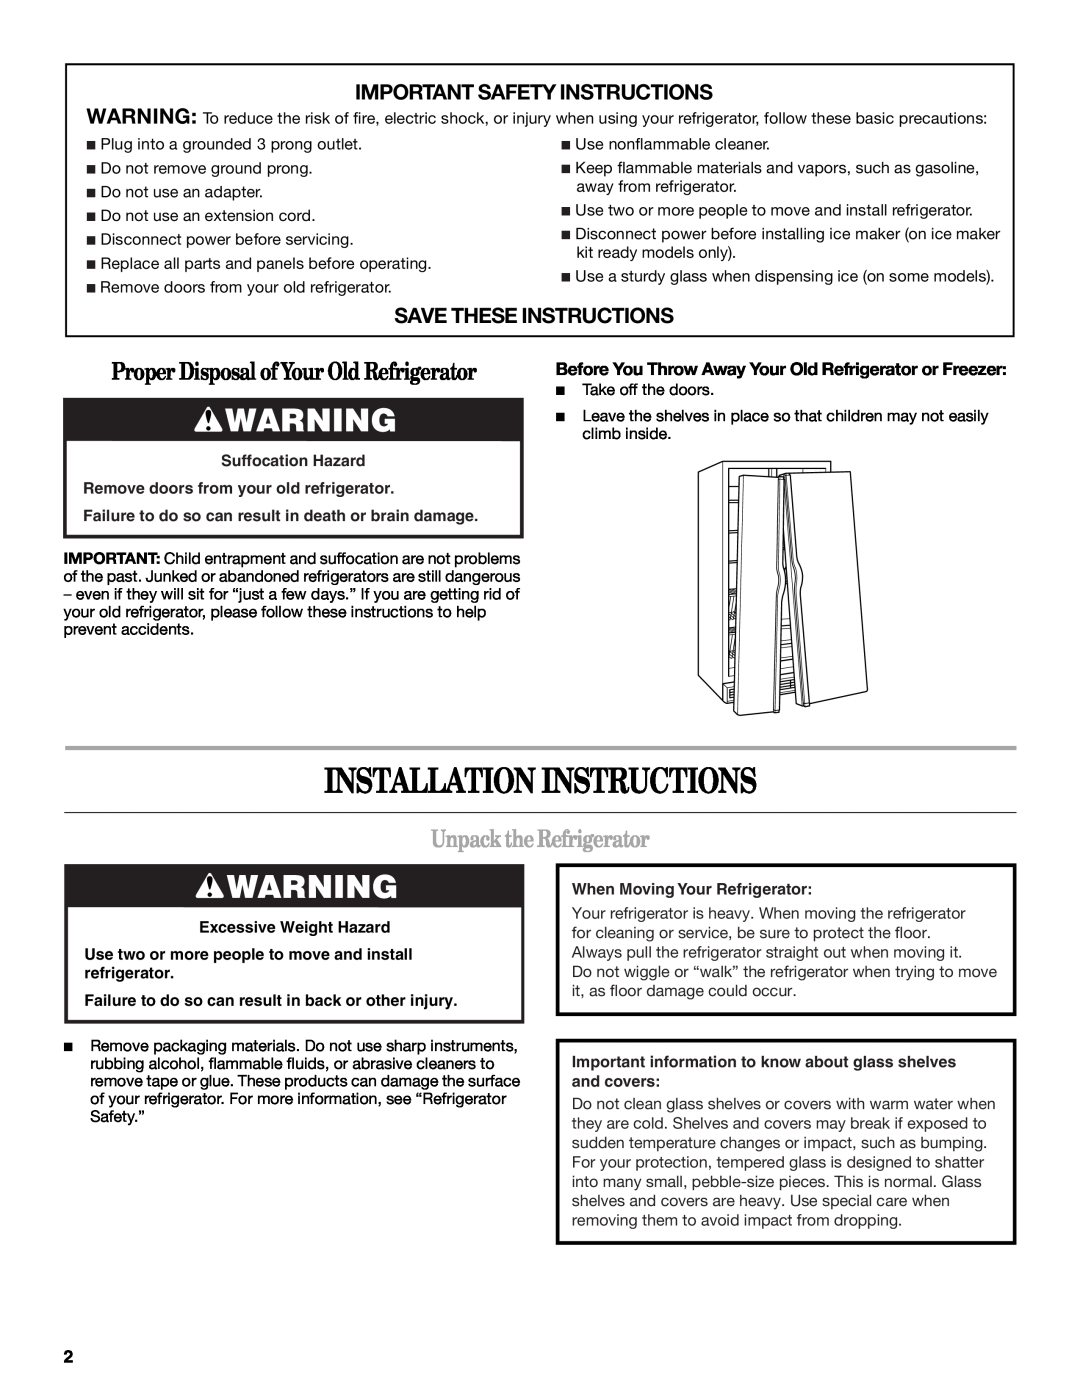 Whirlpool ED5FHAXVS Installation Instructions, Unpack the Refrigerator, Important Safety Instructions, Suffocation Hazard 